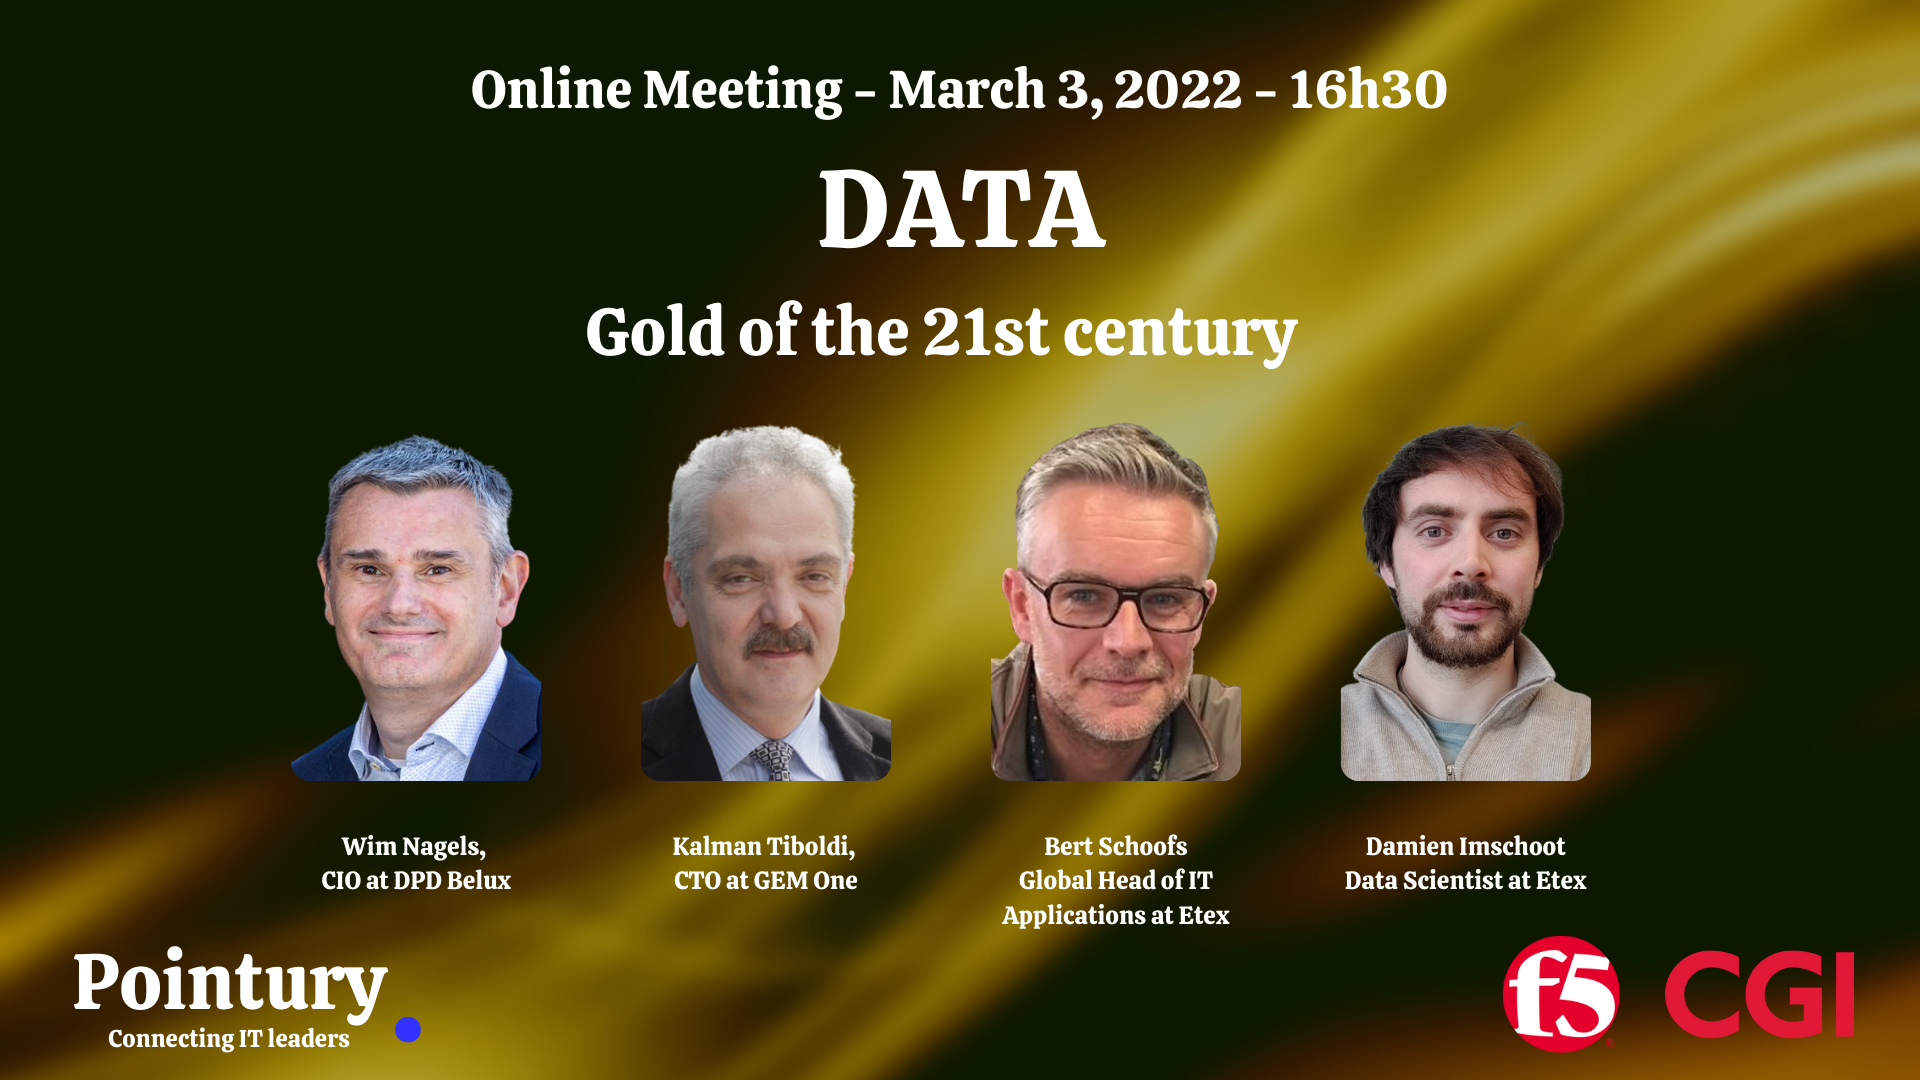 DATA, GOLD OF THE 21st CENTURY